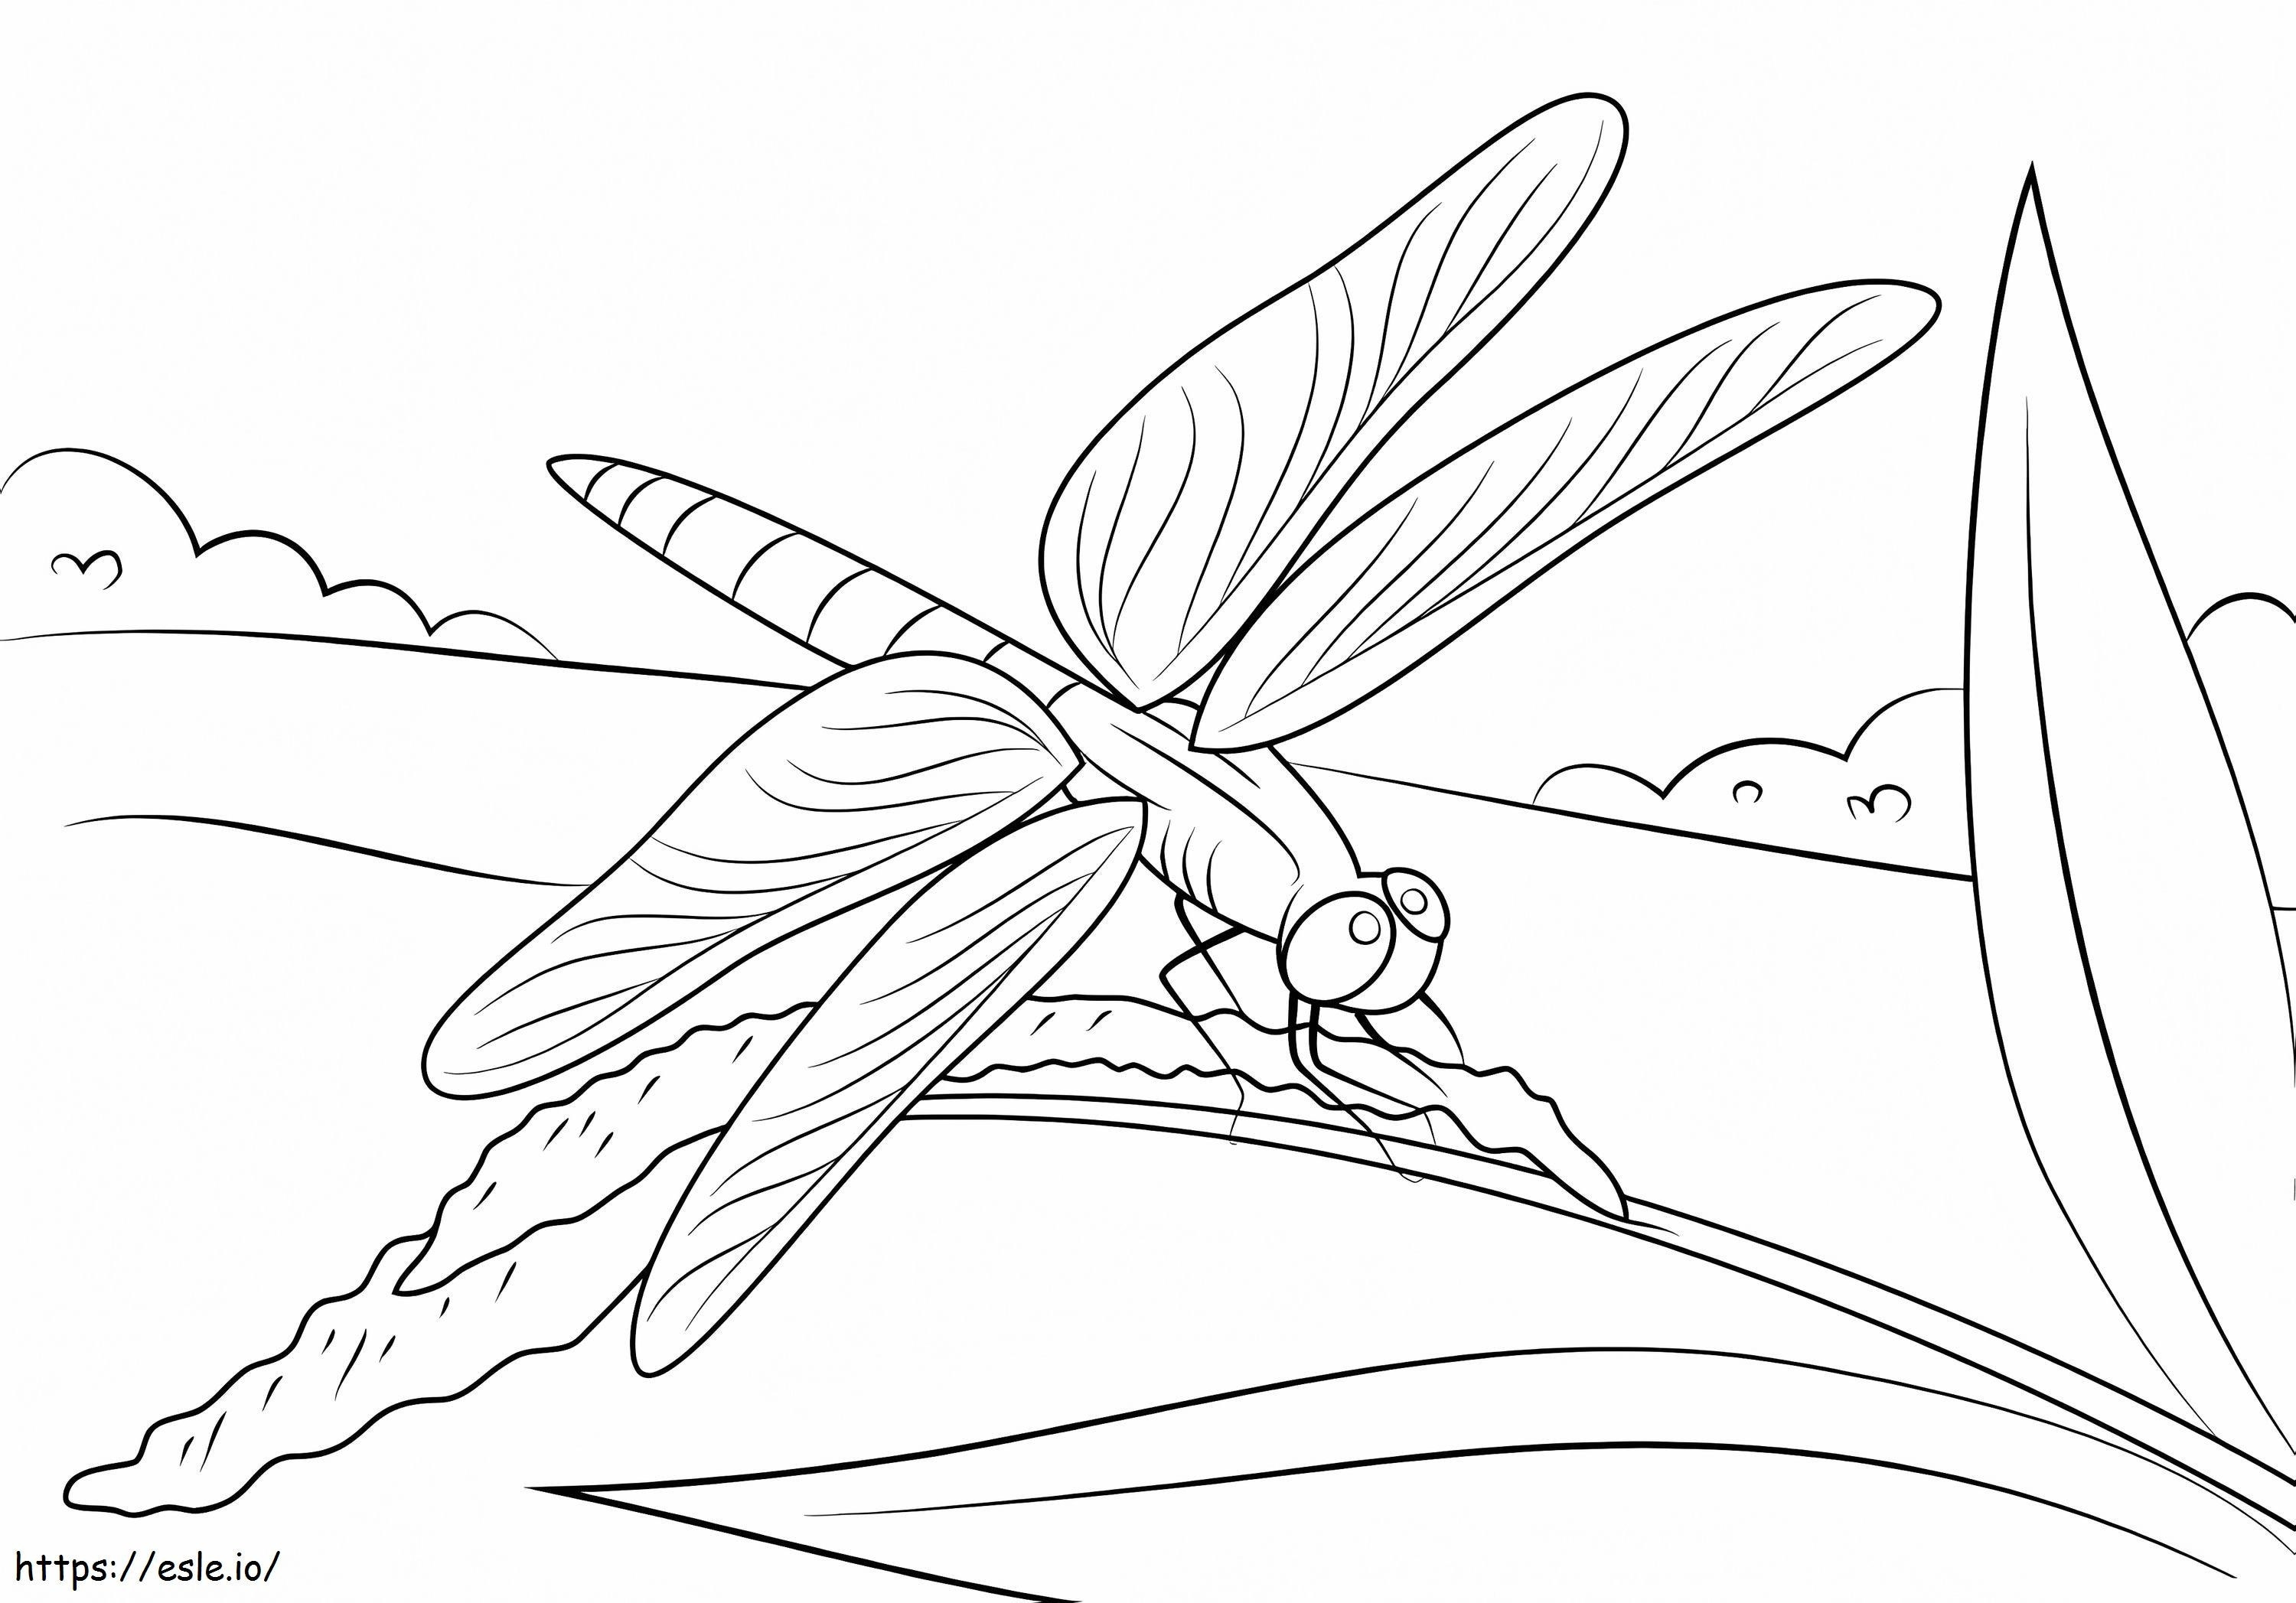 Dragonfly Sits On Stem coloring page